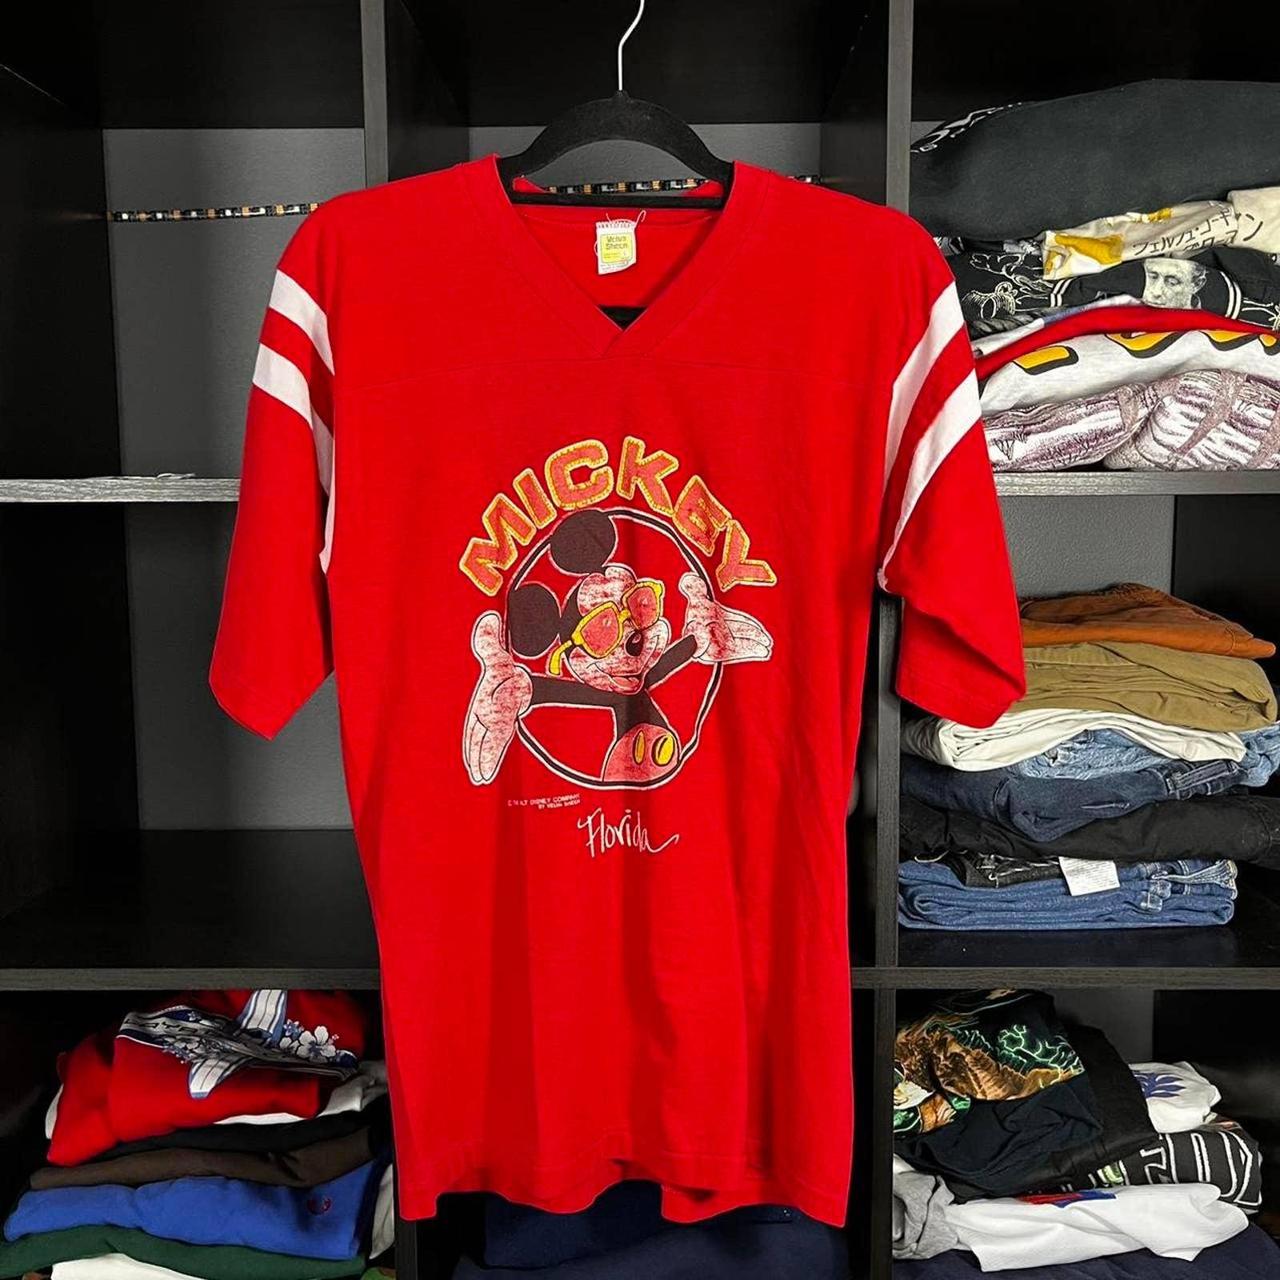 Product Image 1 - Vintage Mickey Mouse Jersey Shirt

Florida